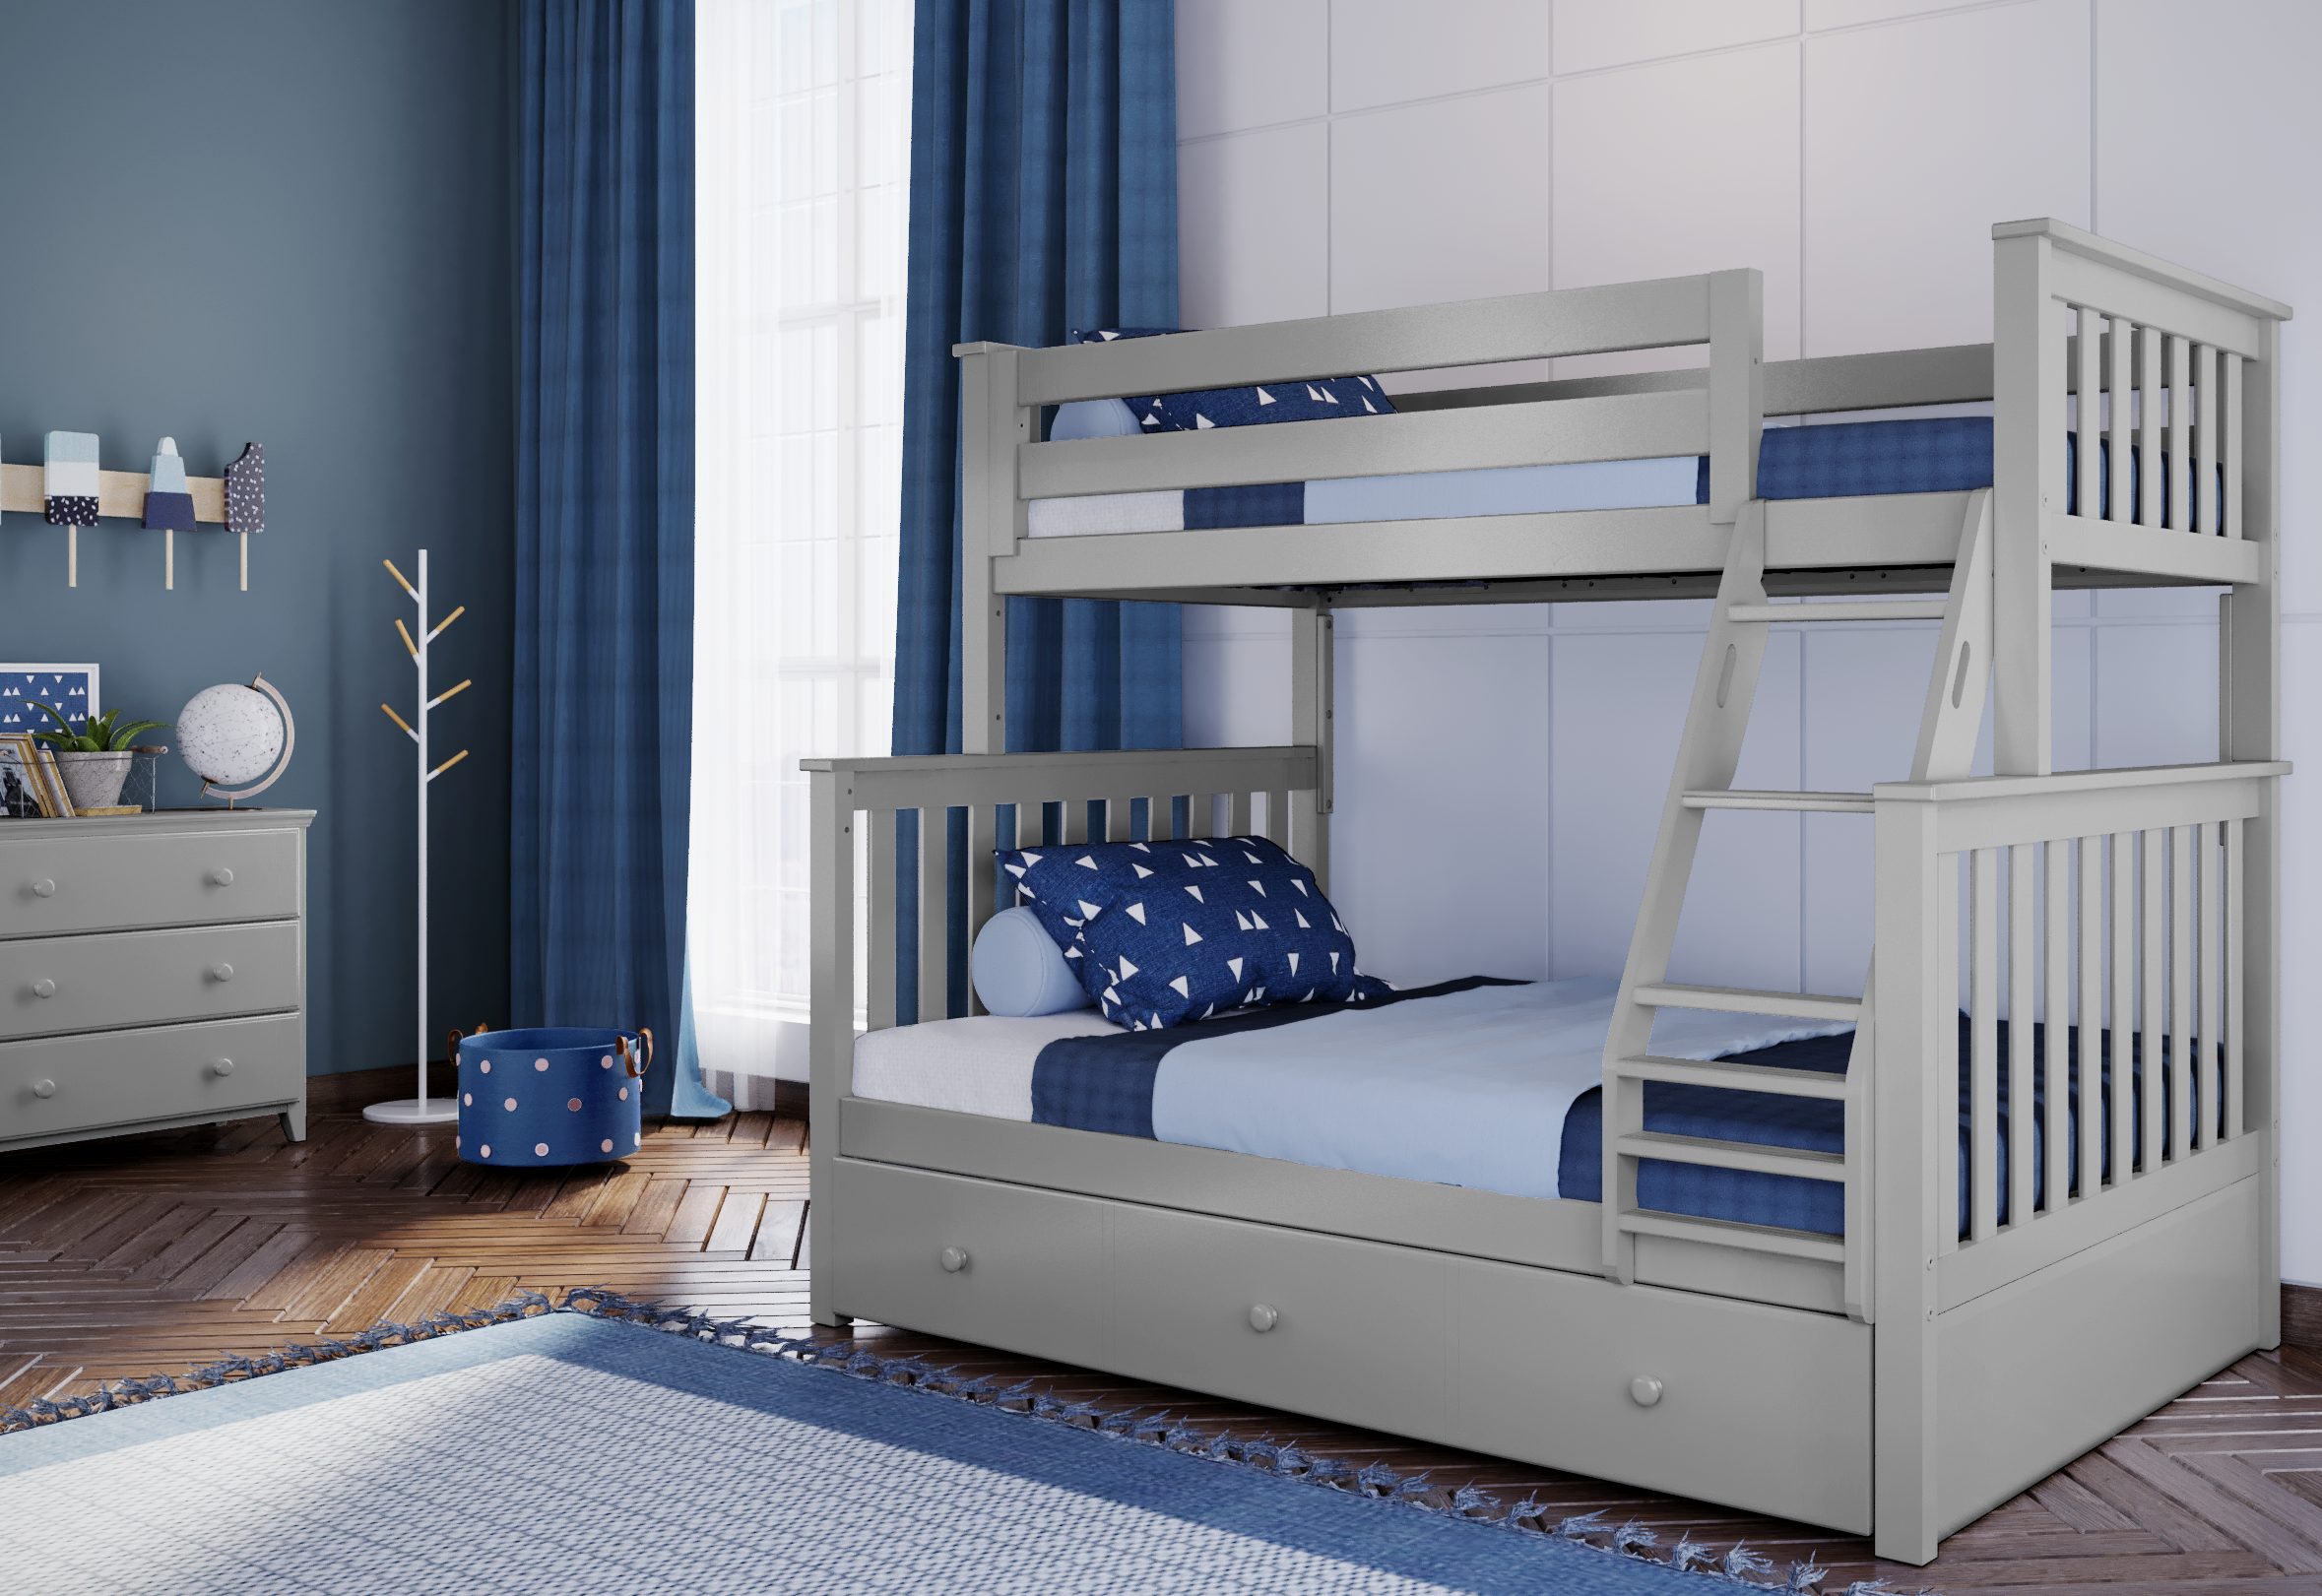 Kent Twin Full Bunk Bed With Angled, Bunk Beds With Slanted Ladder